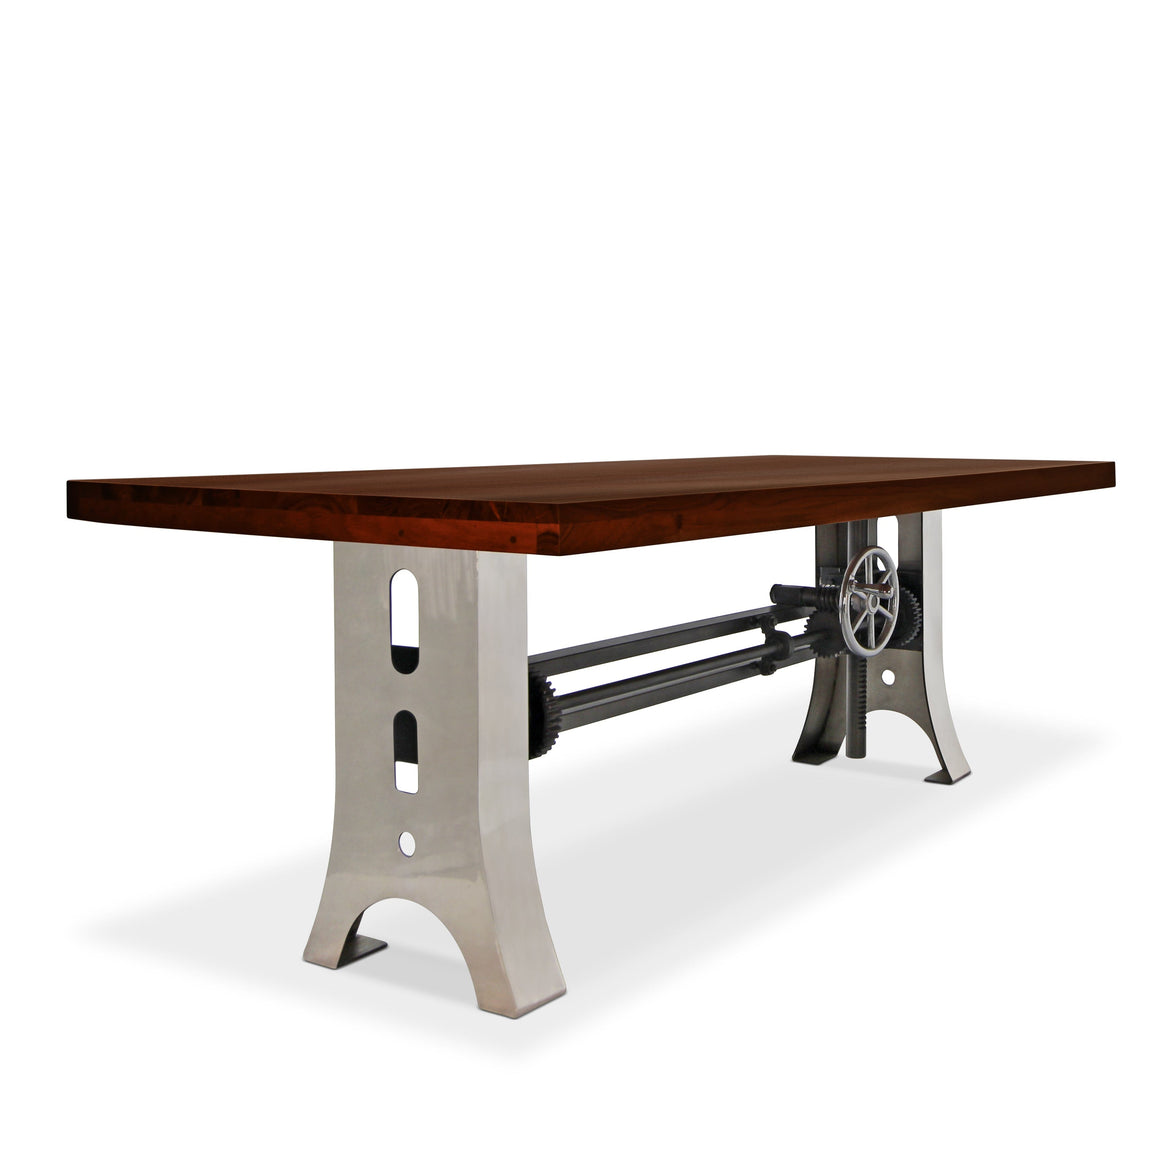 Industrial Dining Table Polished Stainless Steel Adjustable Height Mahogany Dining Table Rustic Deco